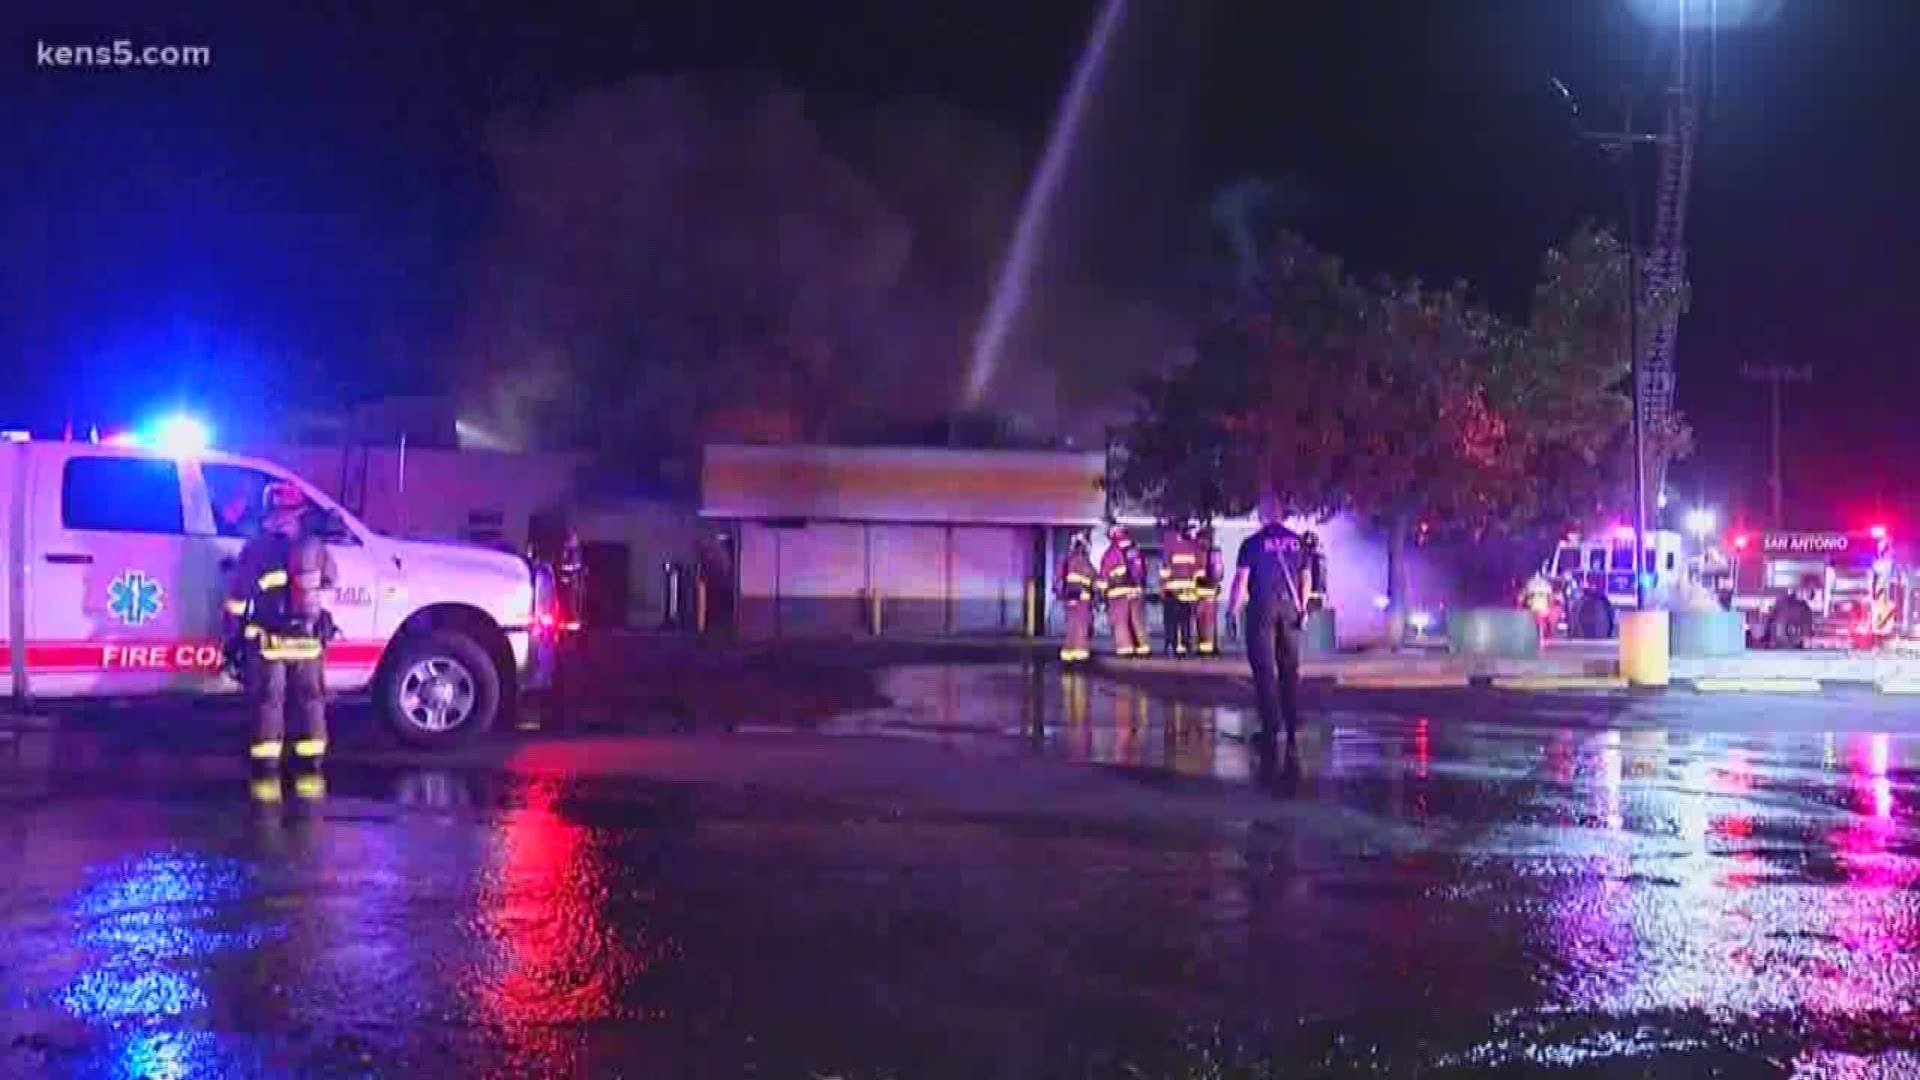 The fire broke out around 2:30 a.m. Monday at the Church's Chicken on South New Braunfels.